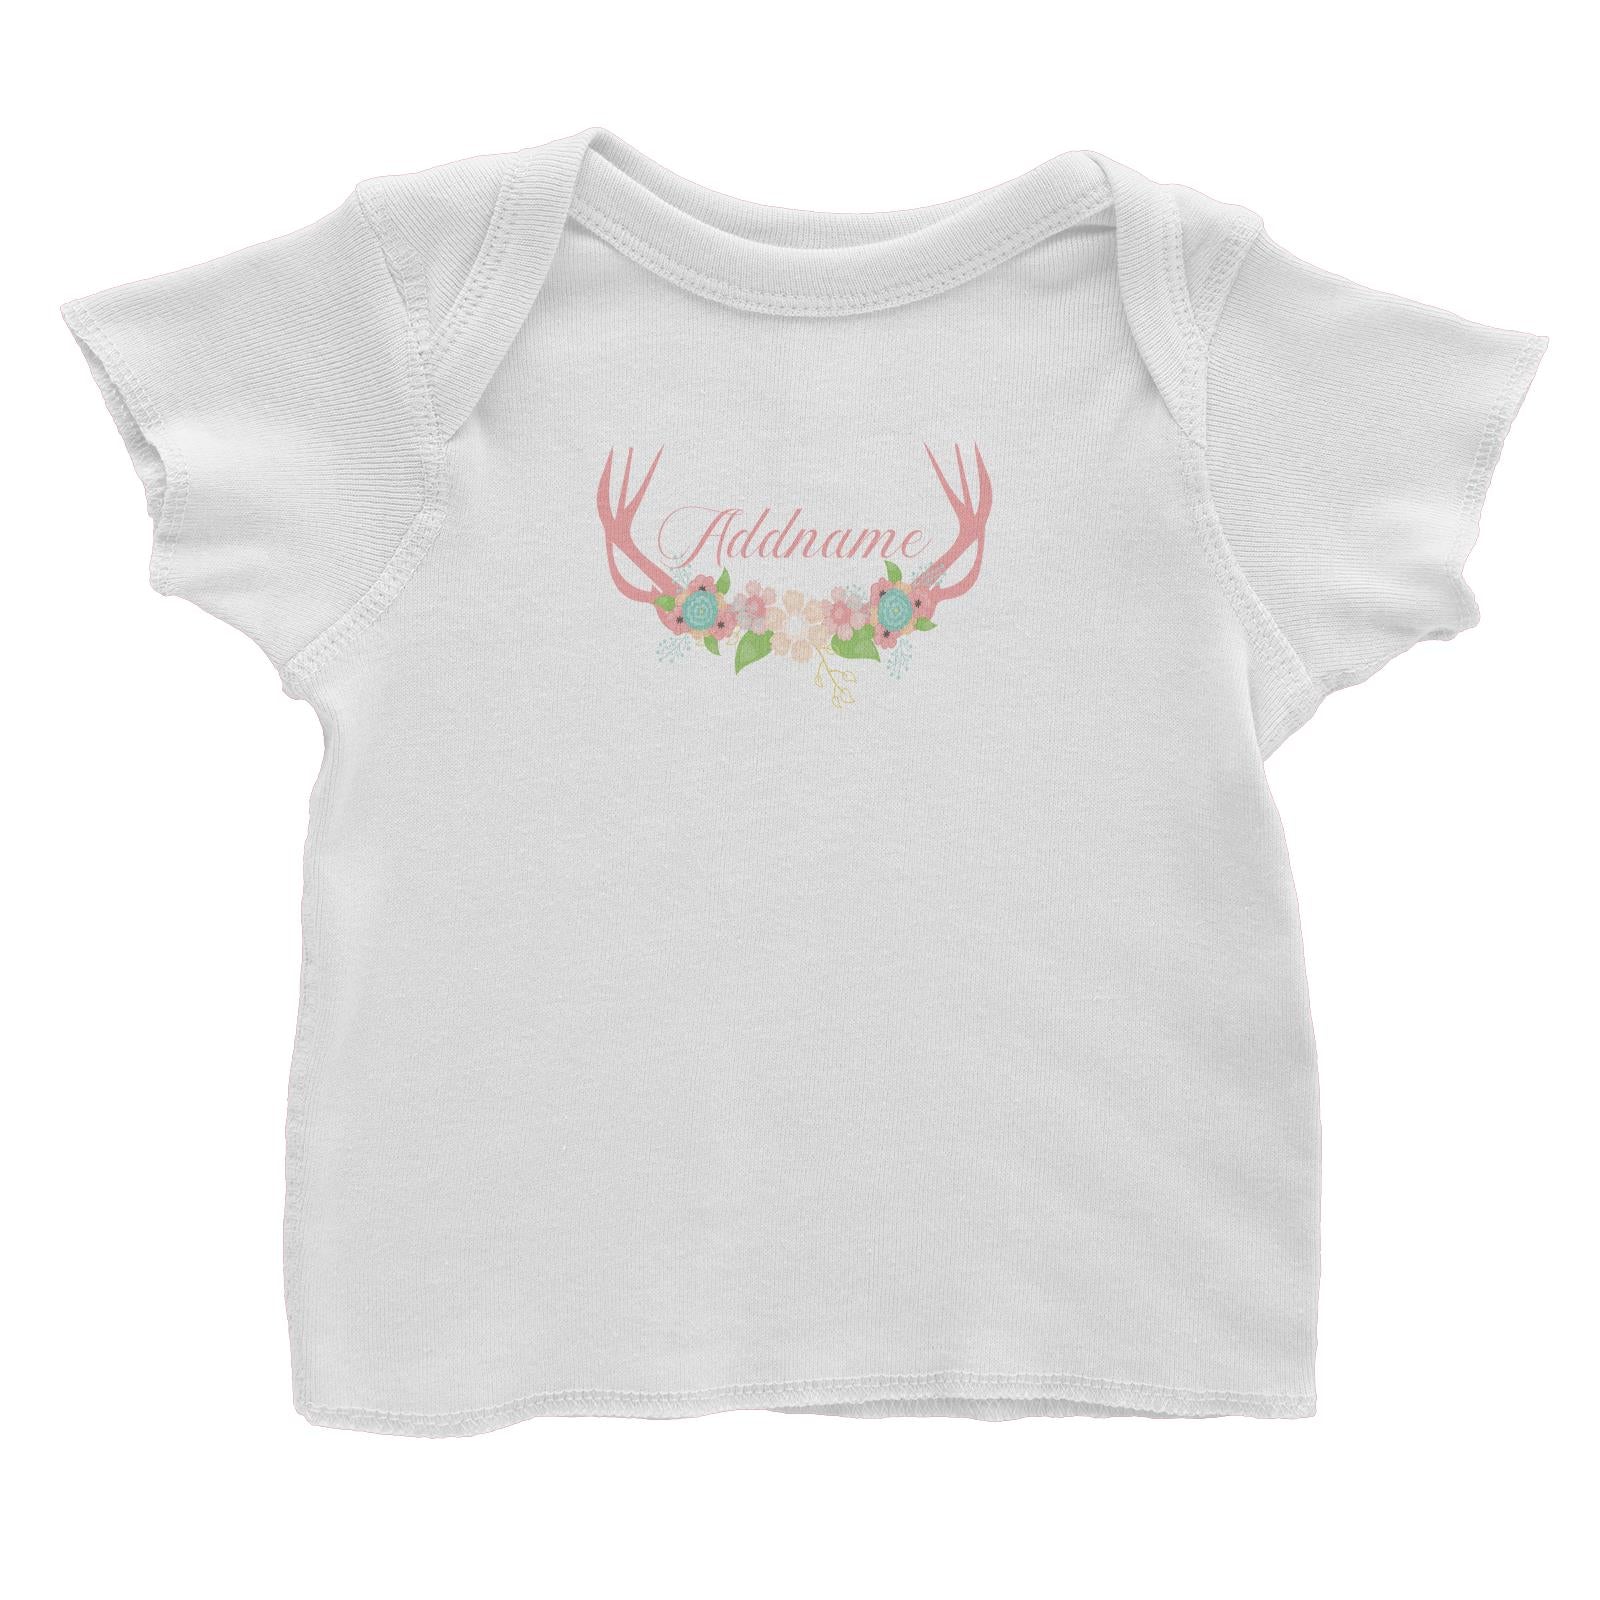 Basic Family Series Pastel Deer Pink Deer Antlers With Flower Addname Baby T-Shirt